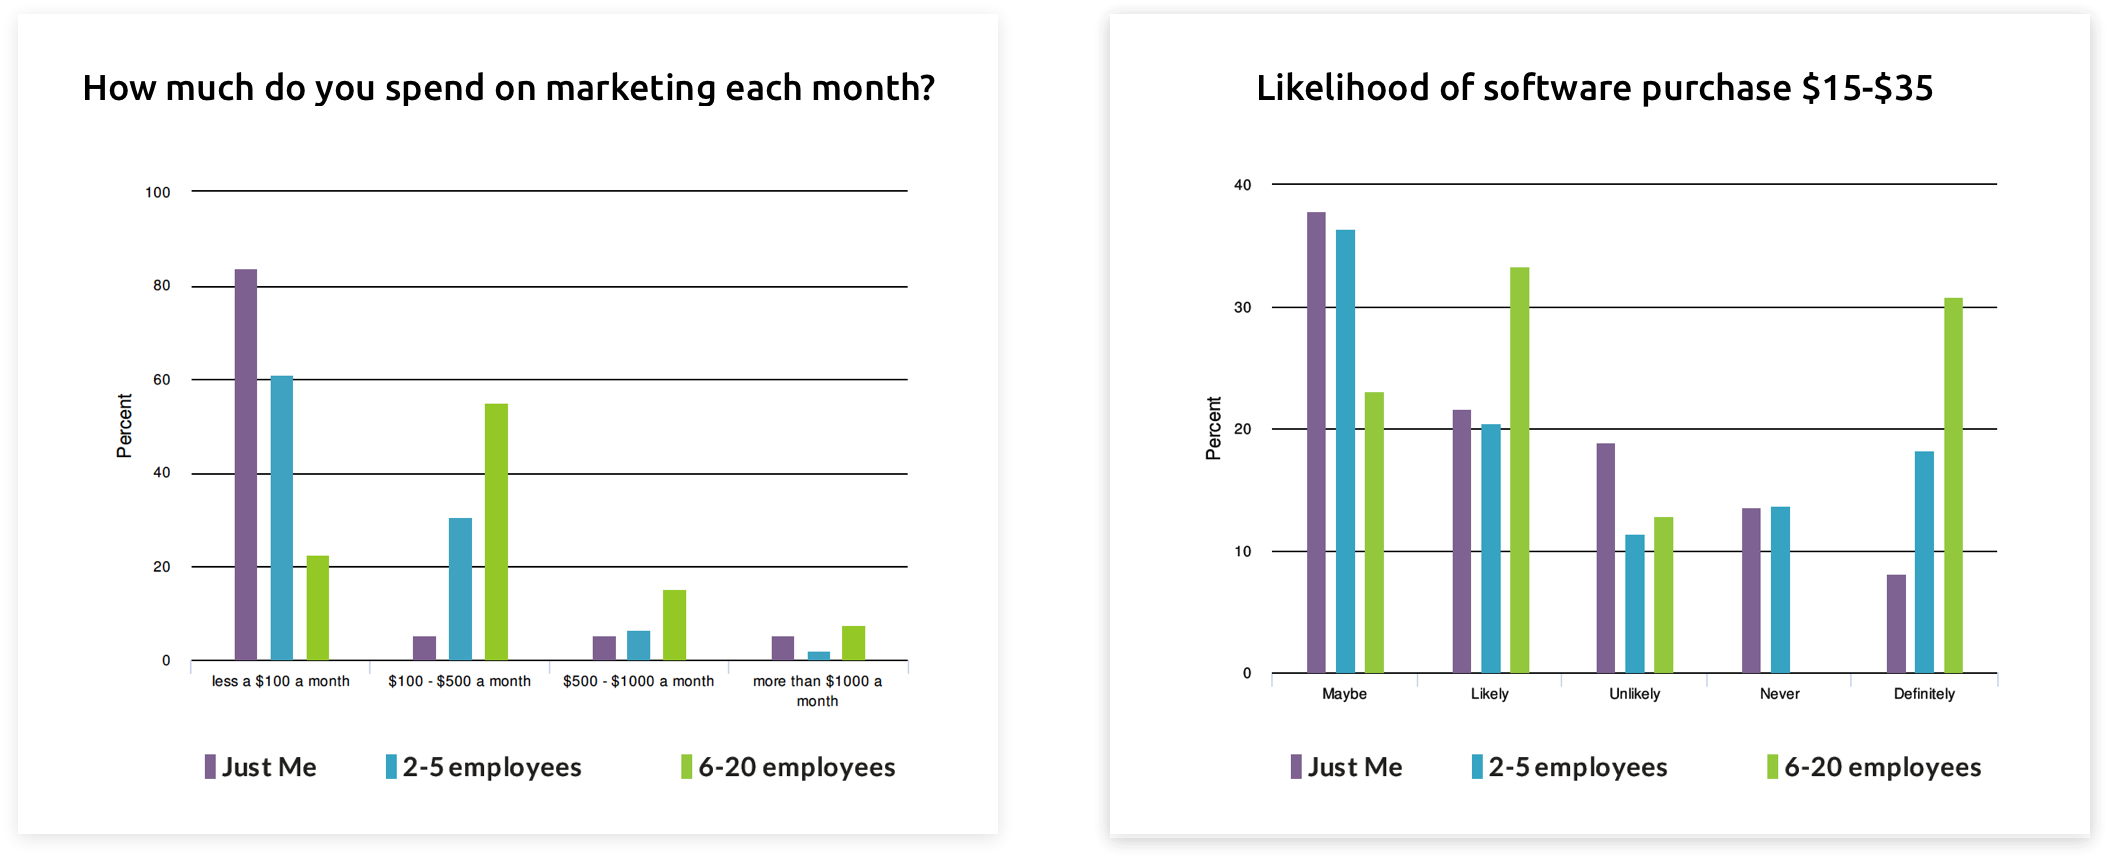 survey results for money spent by business owners on marketing